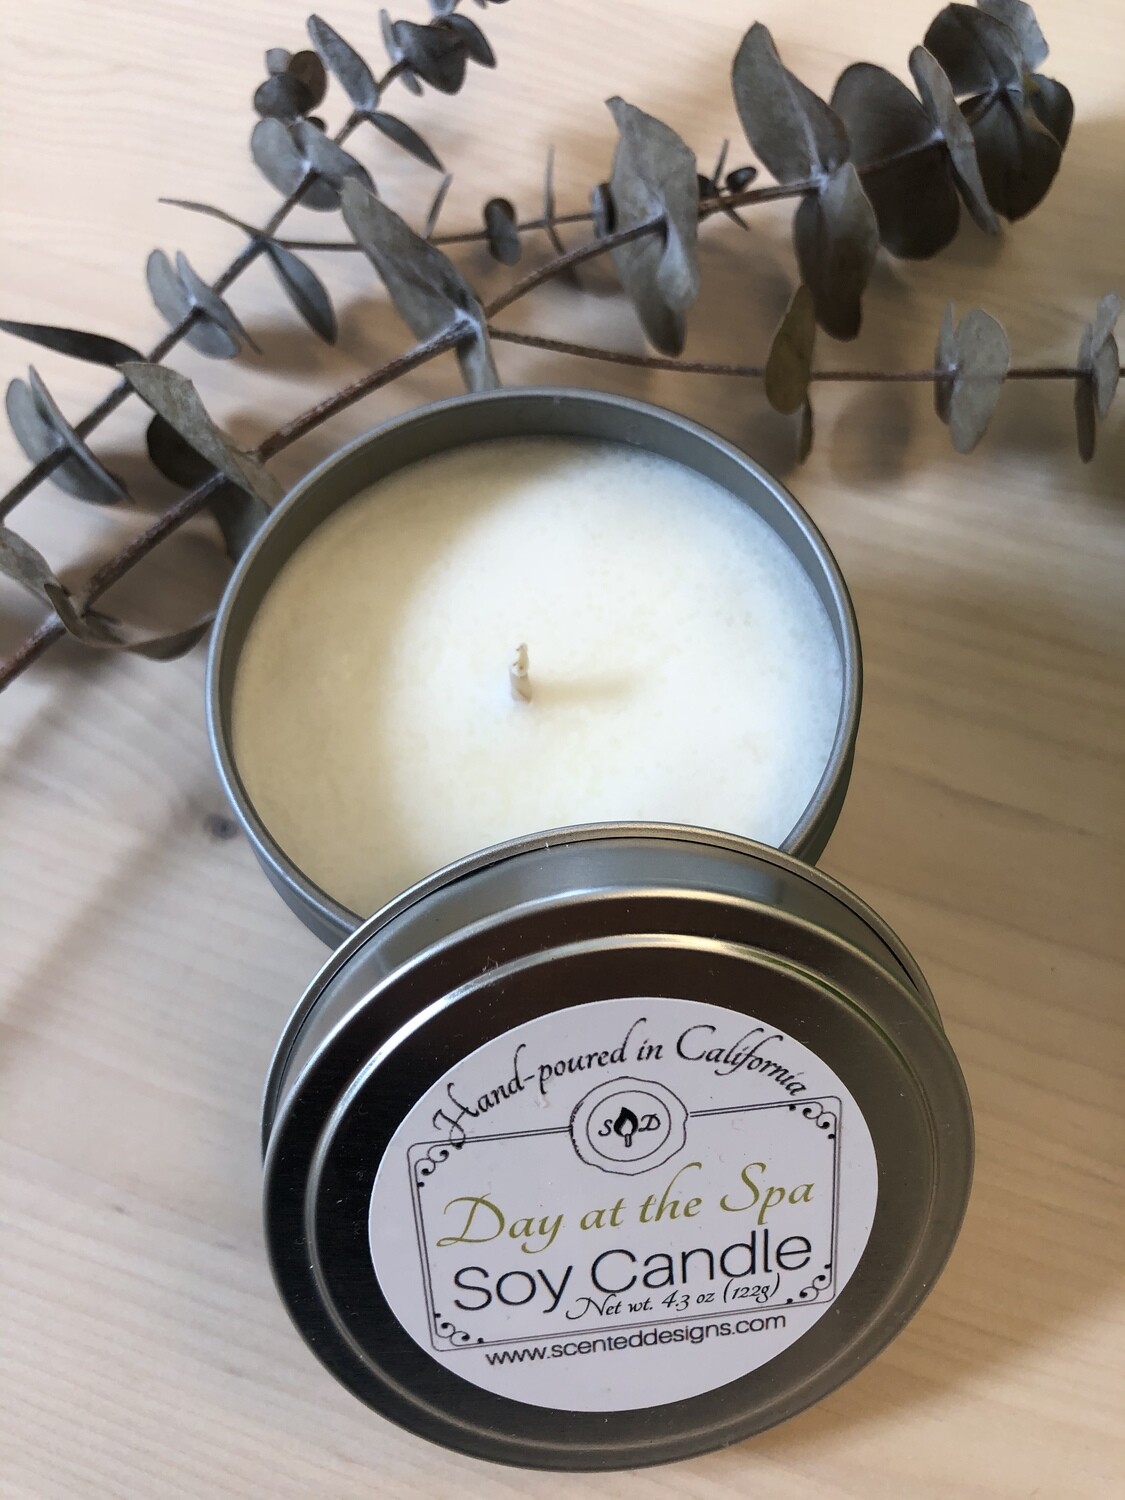 Travel Tin Soy Candle - Day at the Spa